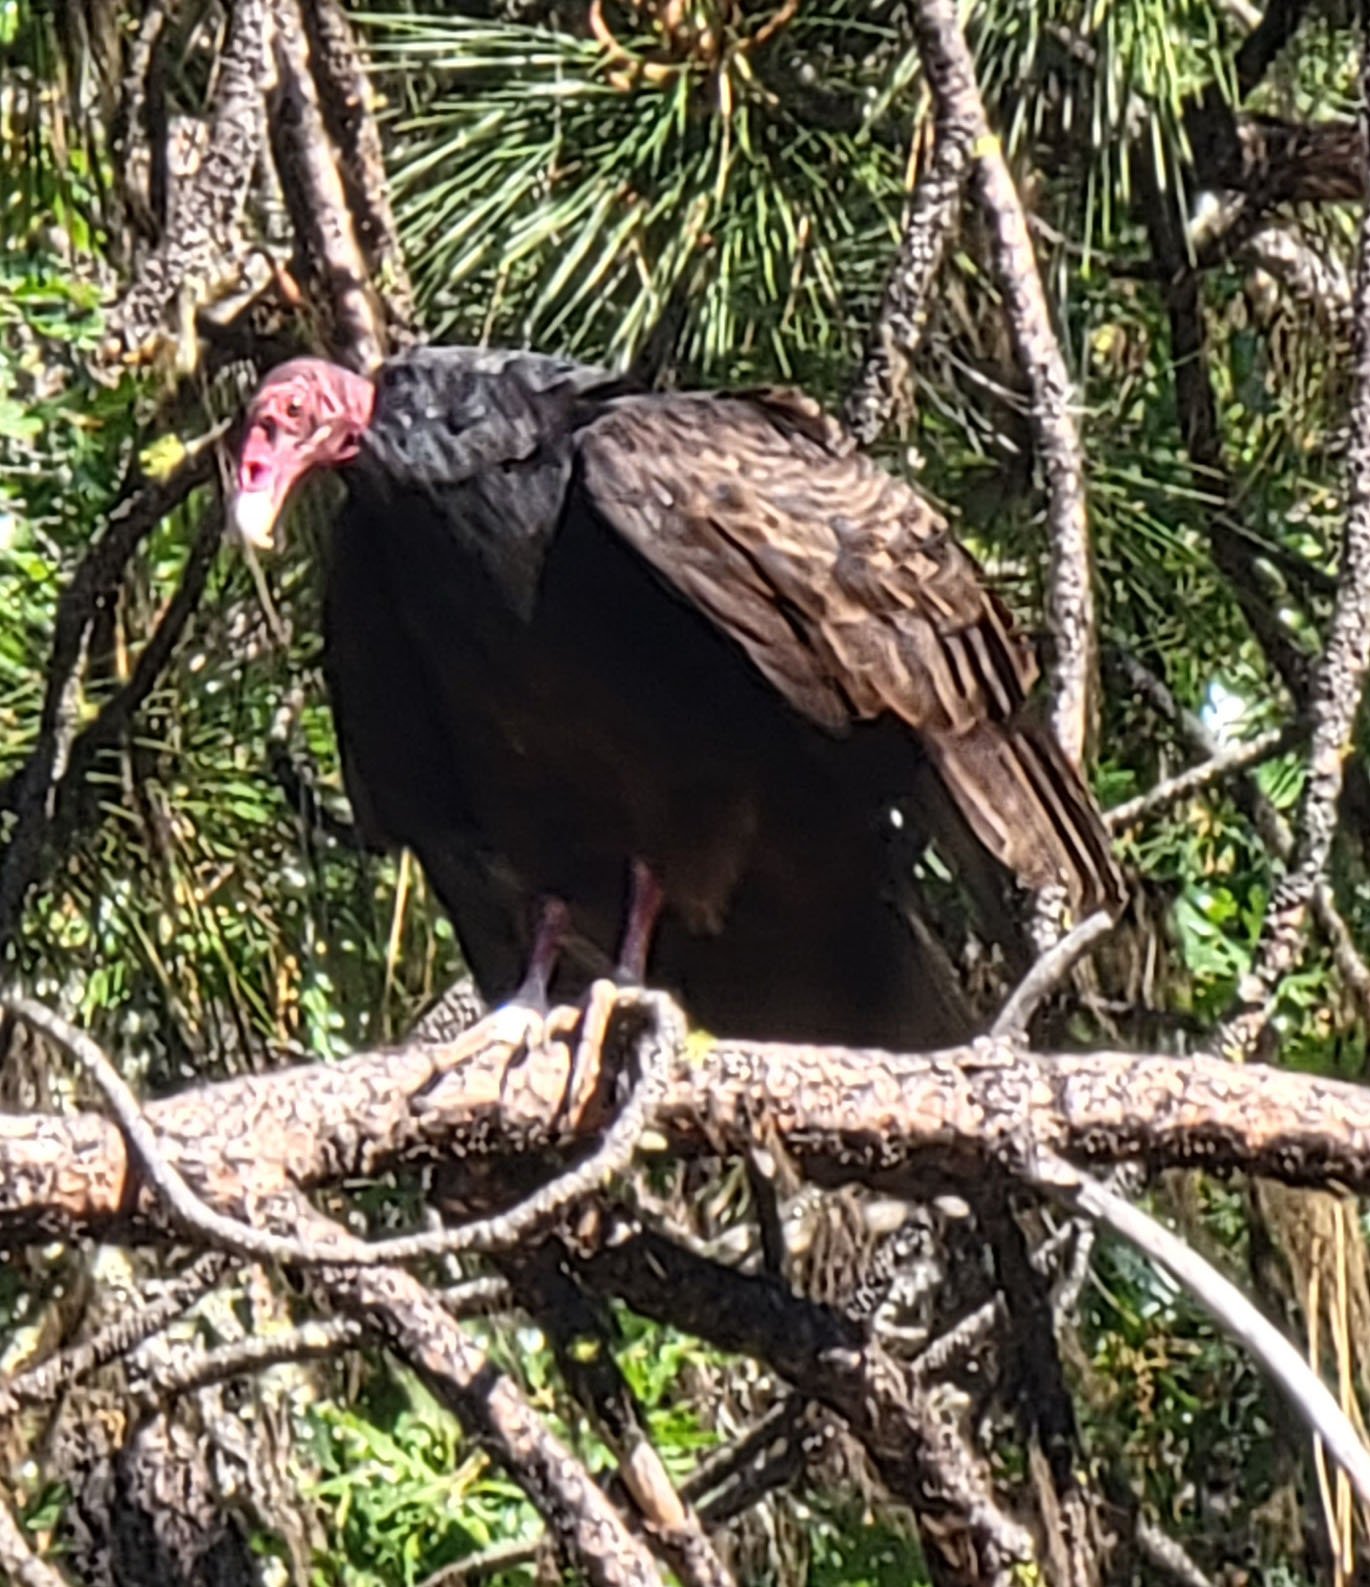 Going slow means I stop and take pictures of wildlife. Check out this Turkey Vulture perched in a tree! Pretty rare to get close to these birds.